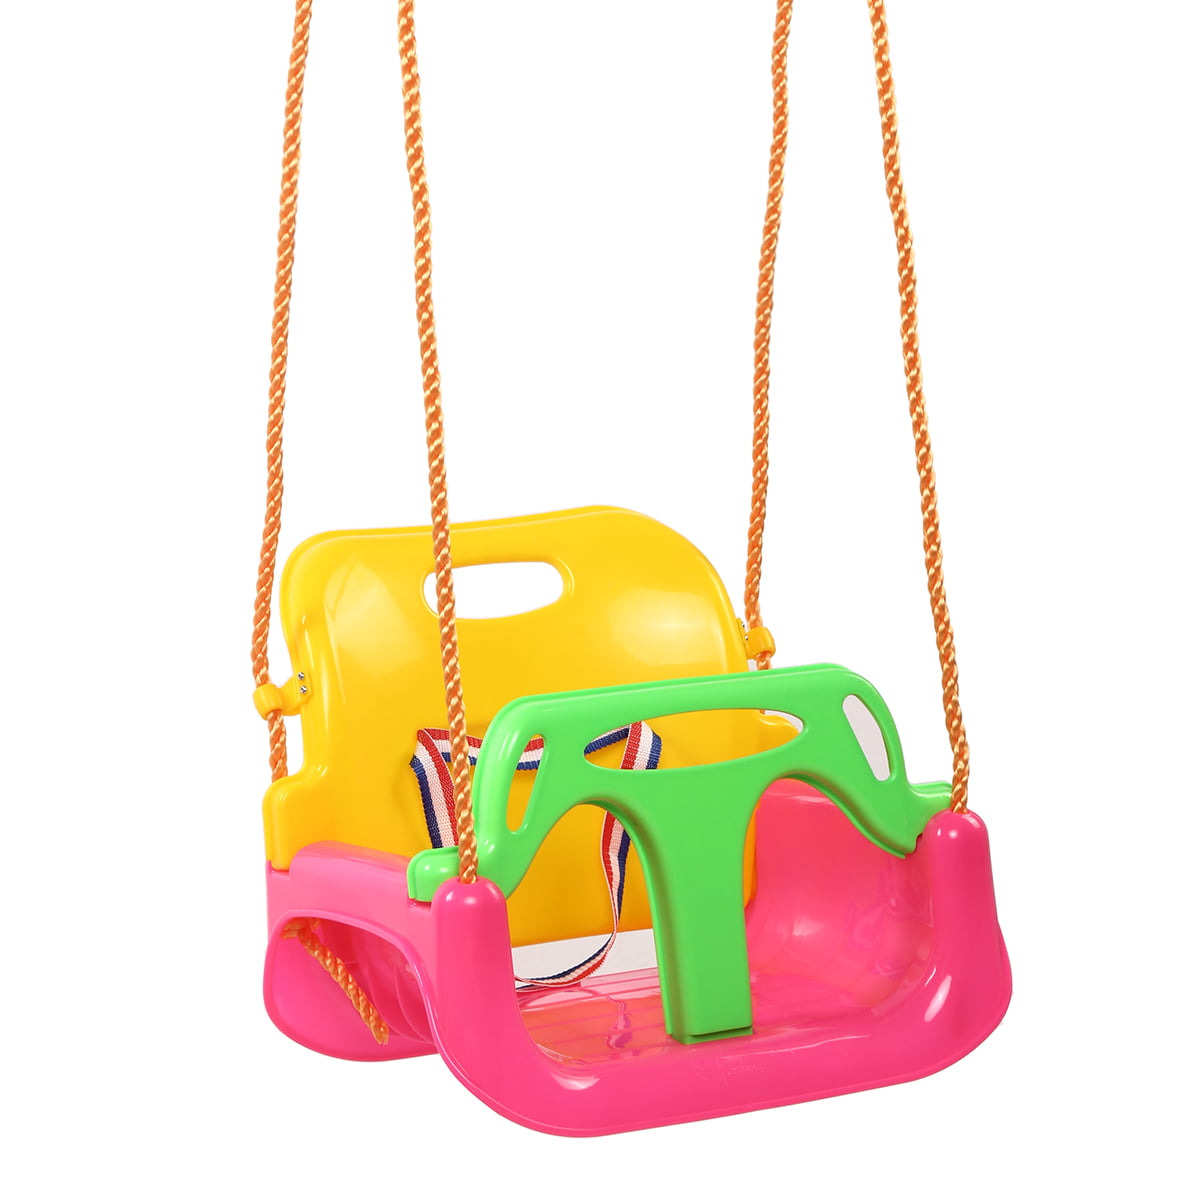 3-in-1 High Backed Toddler Swing Detachable Outdoor Toddlers Children Hanging Seat Toy Robust Rocking Board with Rope Baby/Toddler/Childs Garden Swing Seat